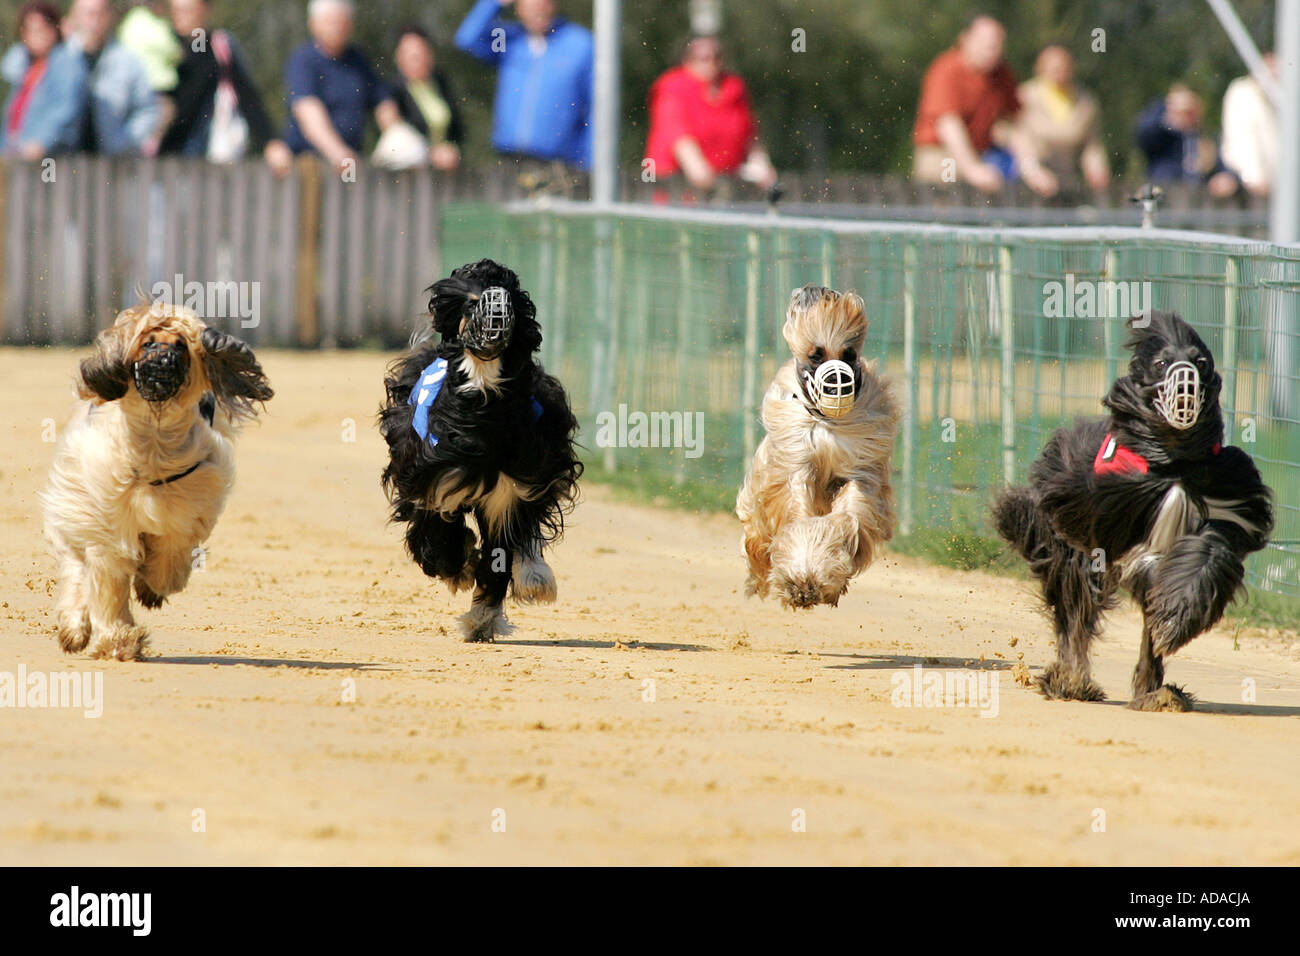 Afghanistan Hound, Afghan Hound (Canis lupus f. familiaris), four individuals at race, Germany Stock Photo